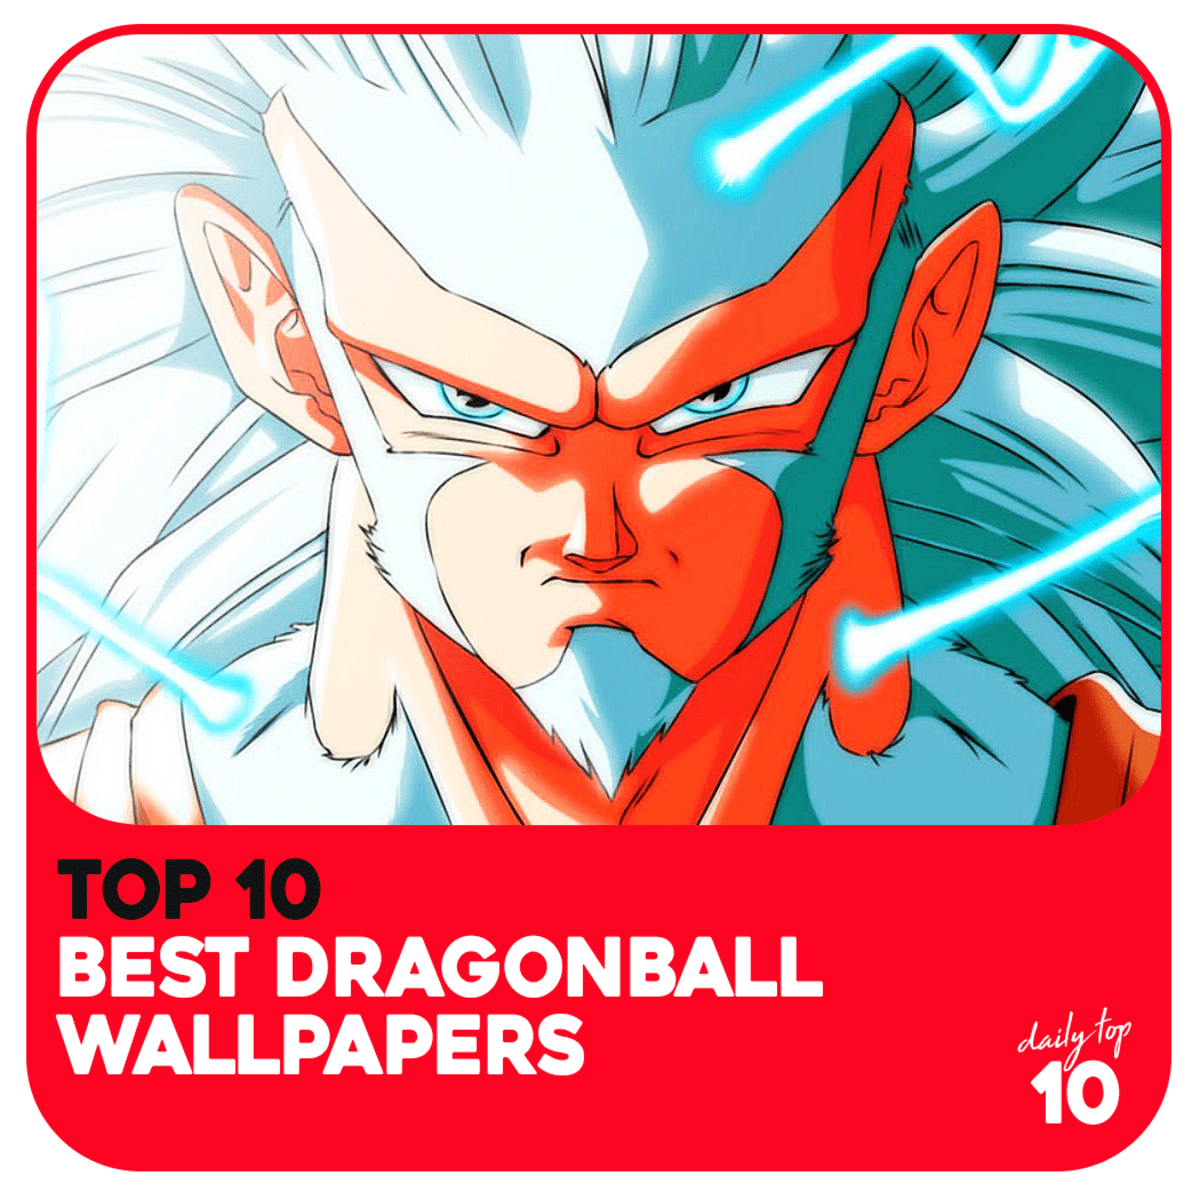 Top best dragonball wallpapers hd updated with dragonball super wallpapers